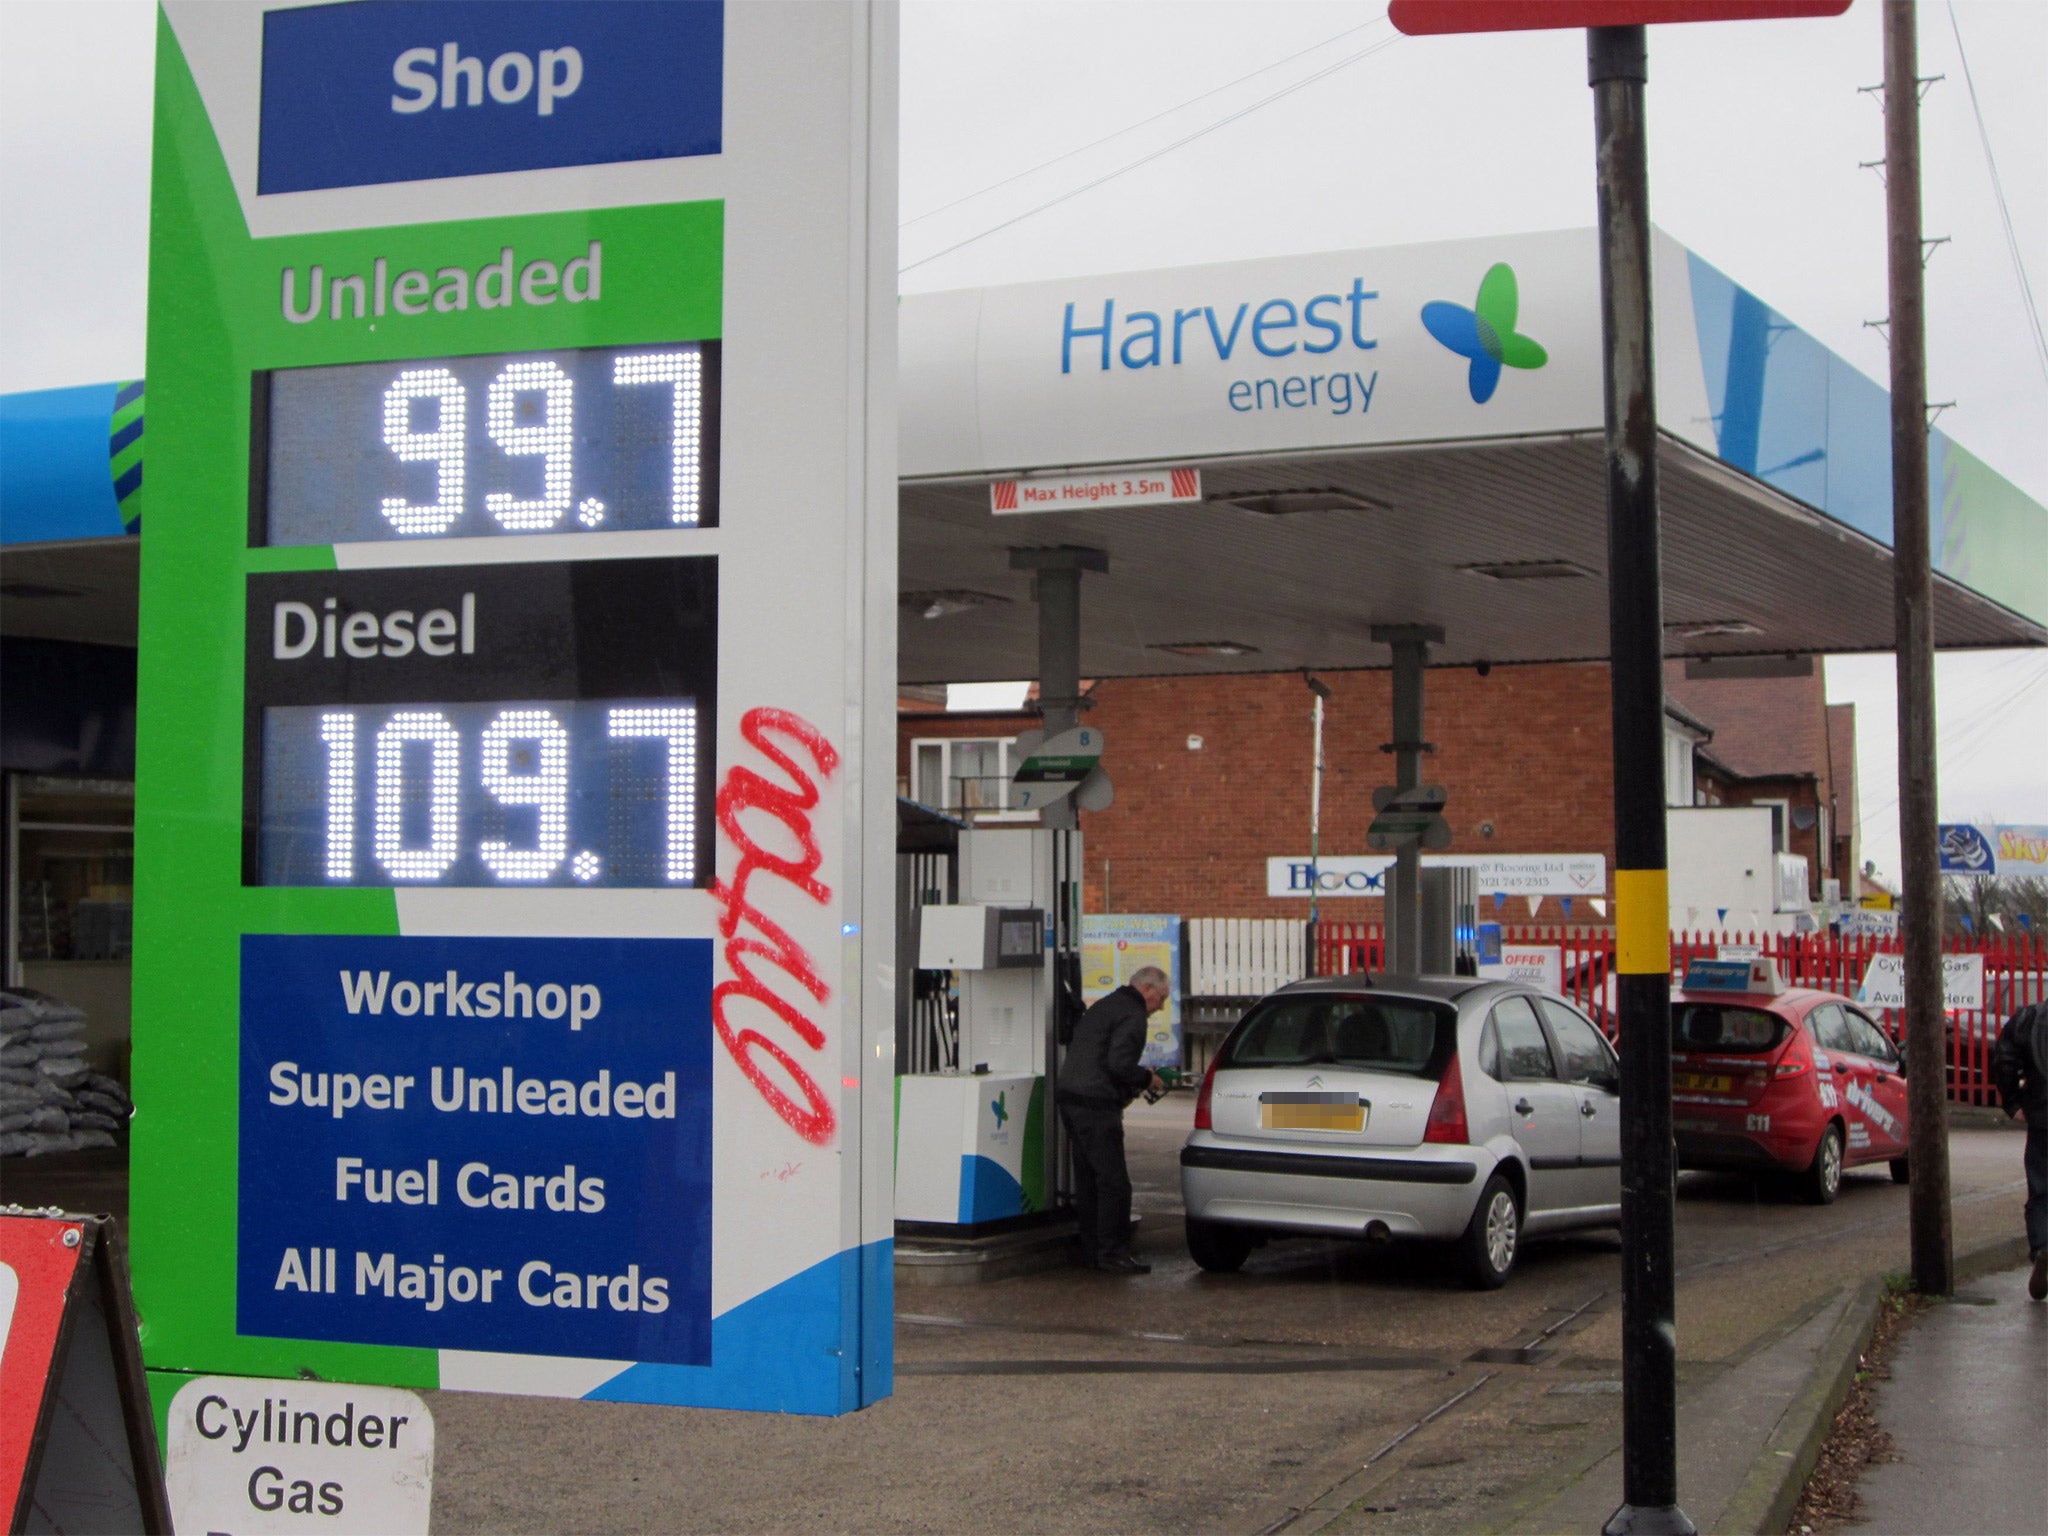 This petrol station in Birmingham is thought to be the first in the UK to drop the price of a litre of unleaded below £1 since 2009